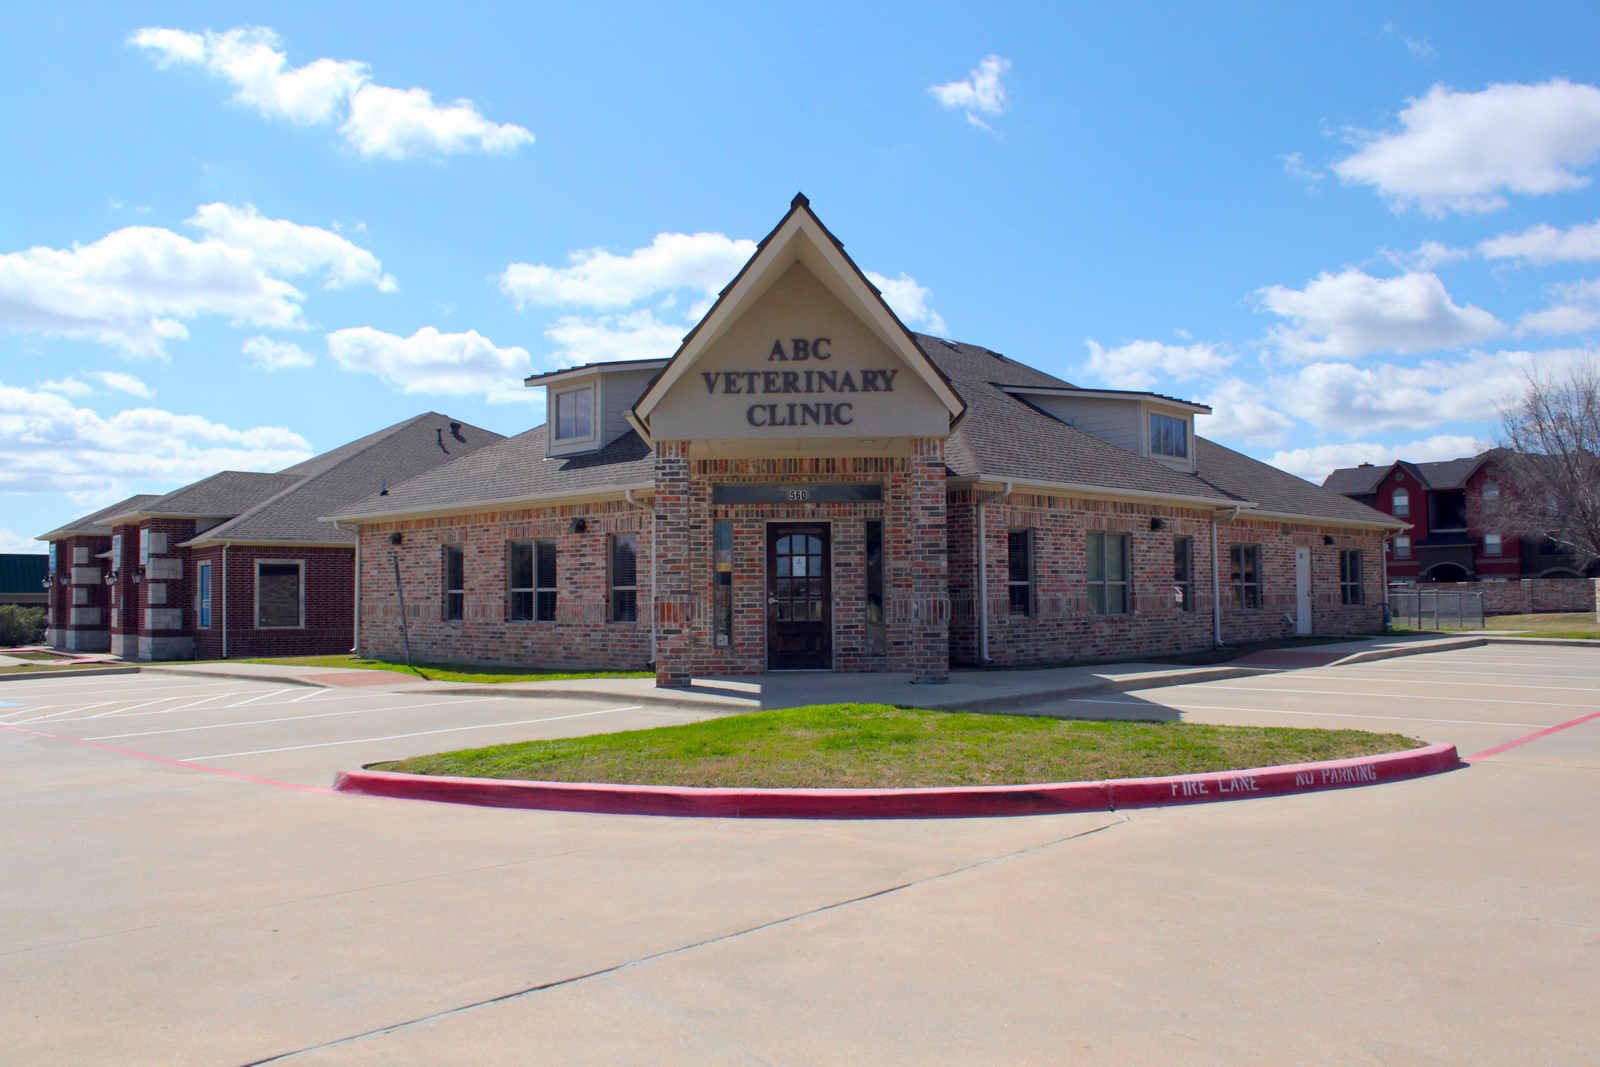 ABC Veterinary Clinic of Lewisville